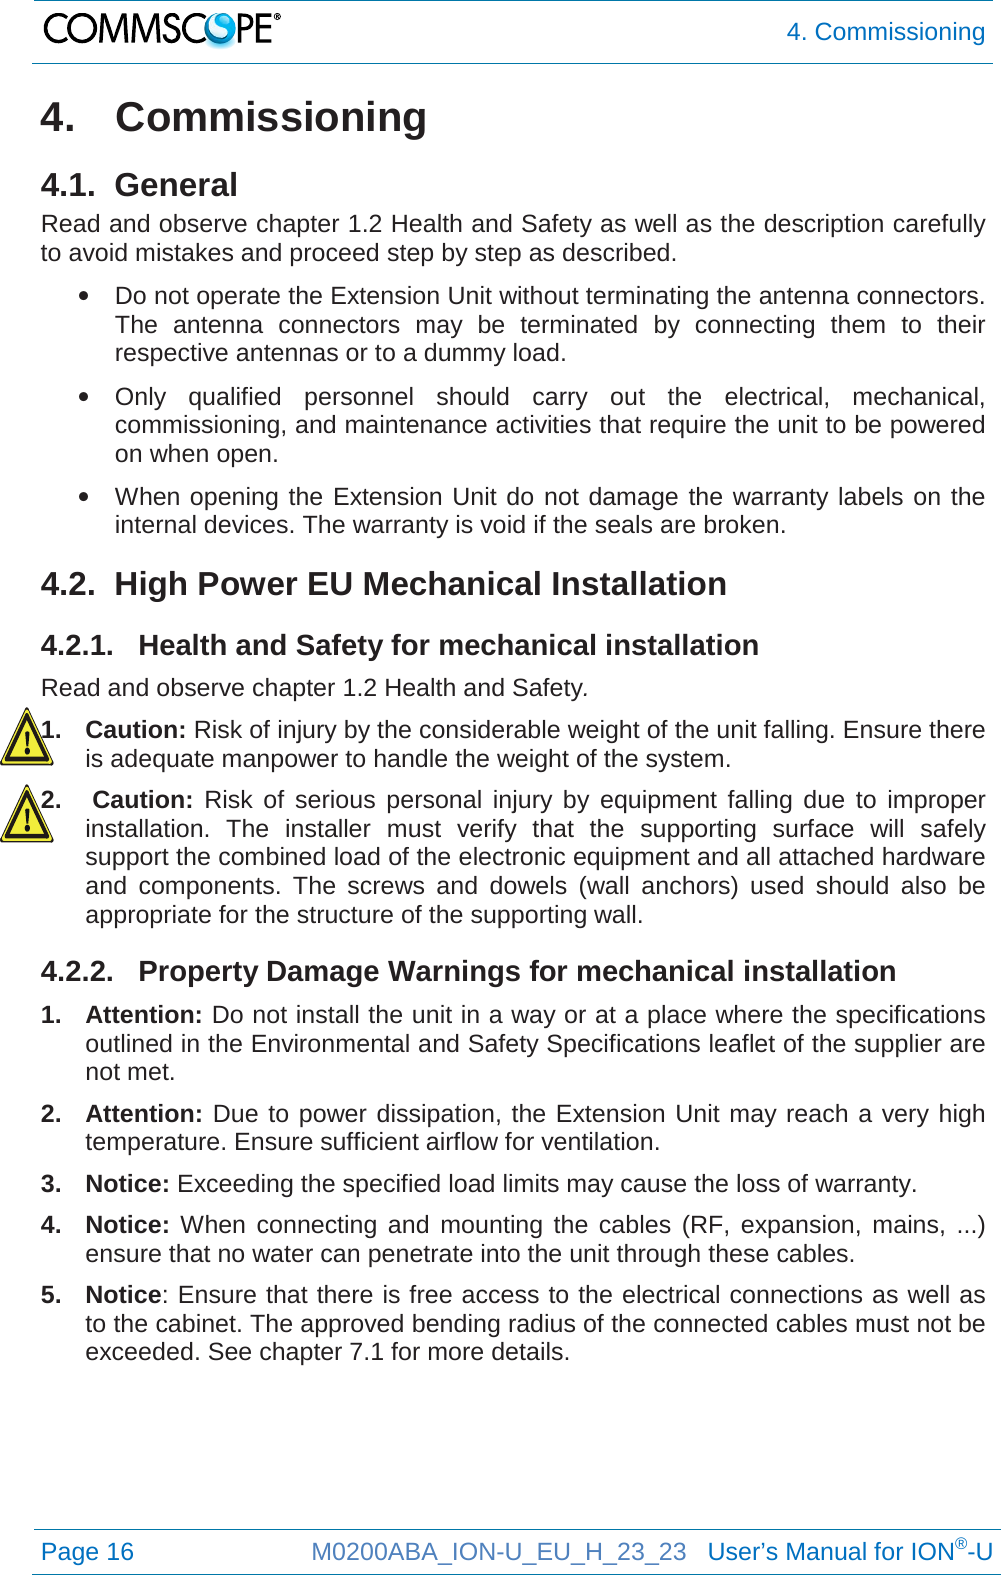  4. Commissioning  Page 16 M0200ABA_ION-U_EU_H_23_23   User’s Manual for ION®-U  4. Commissioning 4.1.  General Read and observe chapter 1.2 Health and Safety as well as the description carefully to avoid mistakes and proceed step by step as described. • Do not operate the Extension Unit without terminating the antenna connectors. The antenna connectors may be terminated by connecting them to their respective antennas or to a dummy load. • Only qualified personnel should carry out the electrical, mechanical, commissioning, and maintenance activities that require the unit to be powered on when open. • When opening the Extension Unit do not damage the warranty labels on the internal devices. The warranty is void if the seals are broken. 4.2.  High Power EU Mechanical Installation 4.2.1. Health and Safety for mechanical installation Read and observe chapter 1.2 Health and Safety. 1. Caution: Risk of injury by the considerable weight of the unit falling. Ensure there is adequate manpower to handle the weight of the system. 2.  Caution: Risk of serious personal injury by equipment falling due to improper installation. The installer must verify that the supporting surface will safely support the combined load of the electronic equipment and all attached hardware and components. The screws and dowels (wall anchors) used should also be appropriate for the structure of the supporting wall. 4.2.2. Property Damage Warnings for mechanical installation 1. Attention: Do not install the unit in a way or at a place where the specifications outlined in the Environmental and Safety Specifications leaflet of the supplier are not met. 2. Attention: Due to power dissipation, the Extension Unit may reach a very high temperature. Ensure sufficient airflow for ventilation. 3. Notice: Exceeding the specified load limits may cause the loss of warranty. 4. Notice: When connecting and mounting the cables (RF, expansion, mains, ...) ensure that no water can penetrate into the unit through these cables. 5. Notice: Ensure that there is free access to the electrical connections as well as to the cabinet. The approved bending radius of the connected cables must not be exceeded. See chapter 7.1 for more details.    